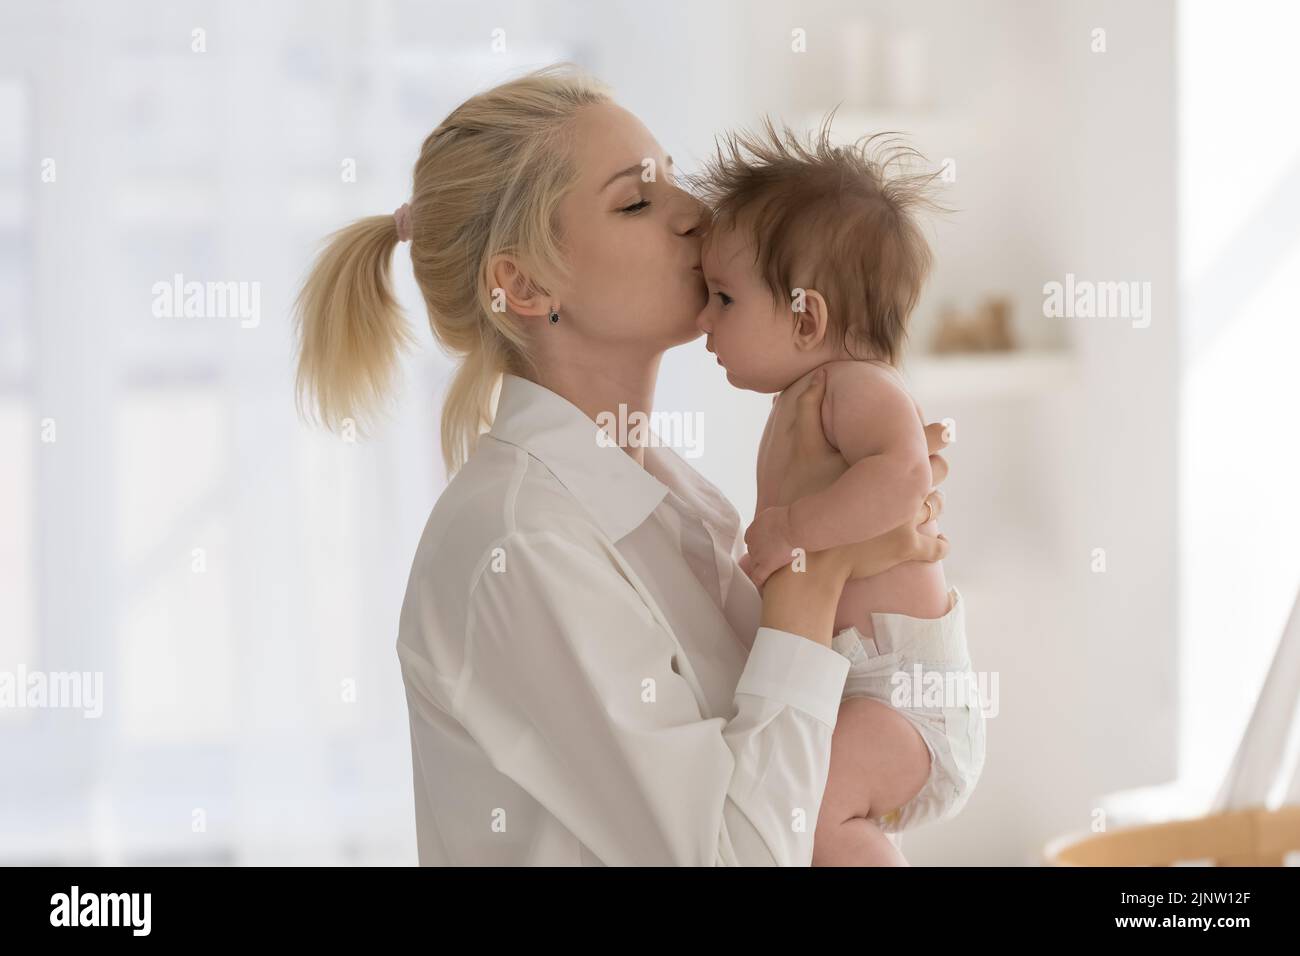 Young loving affectionate mother kisses newborn baby Stock Photo